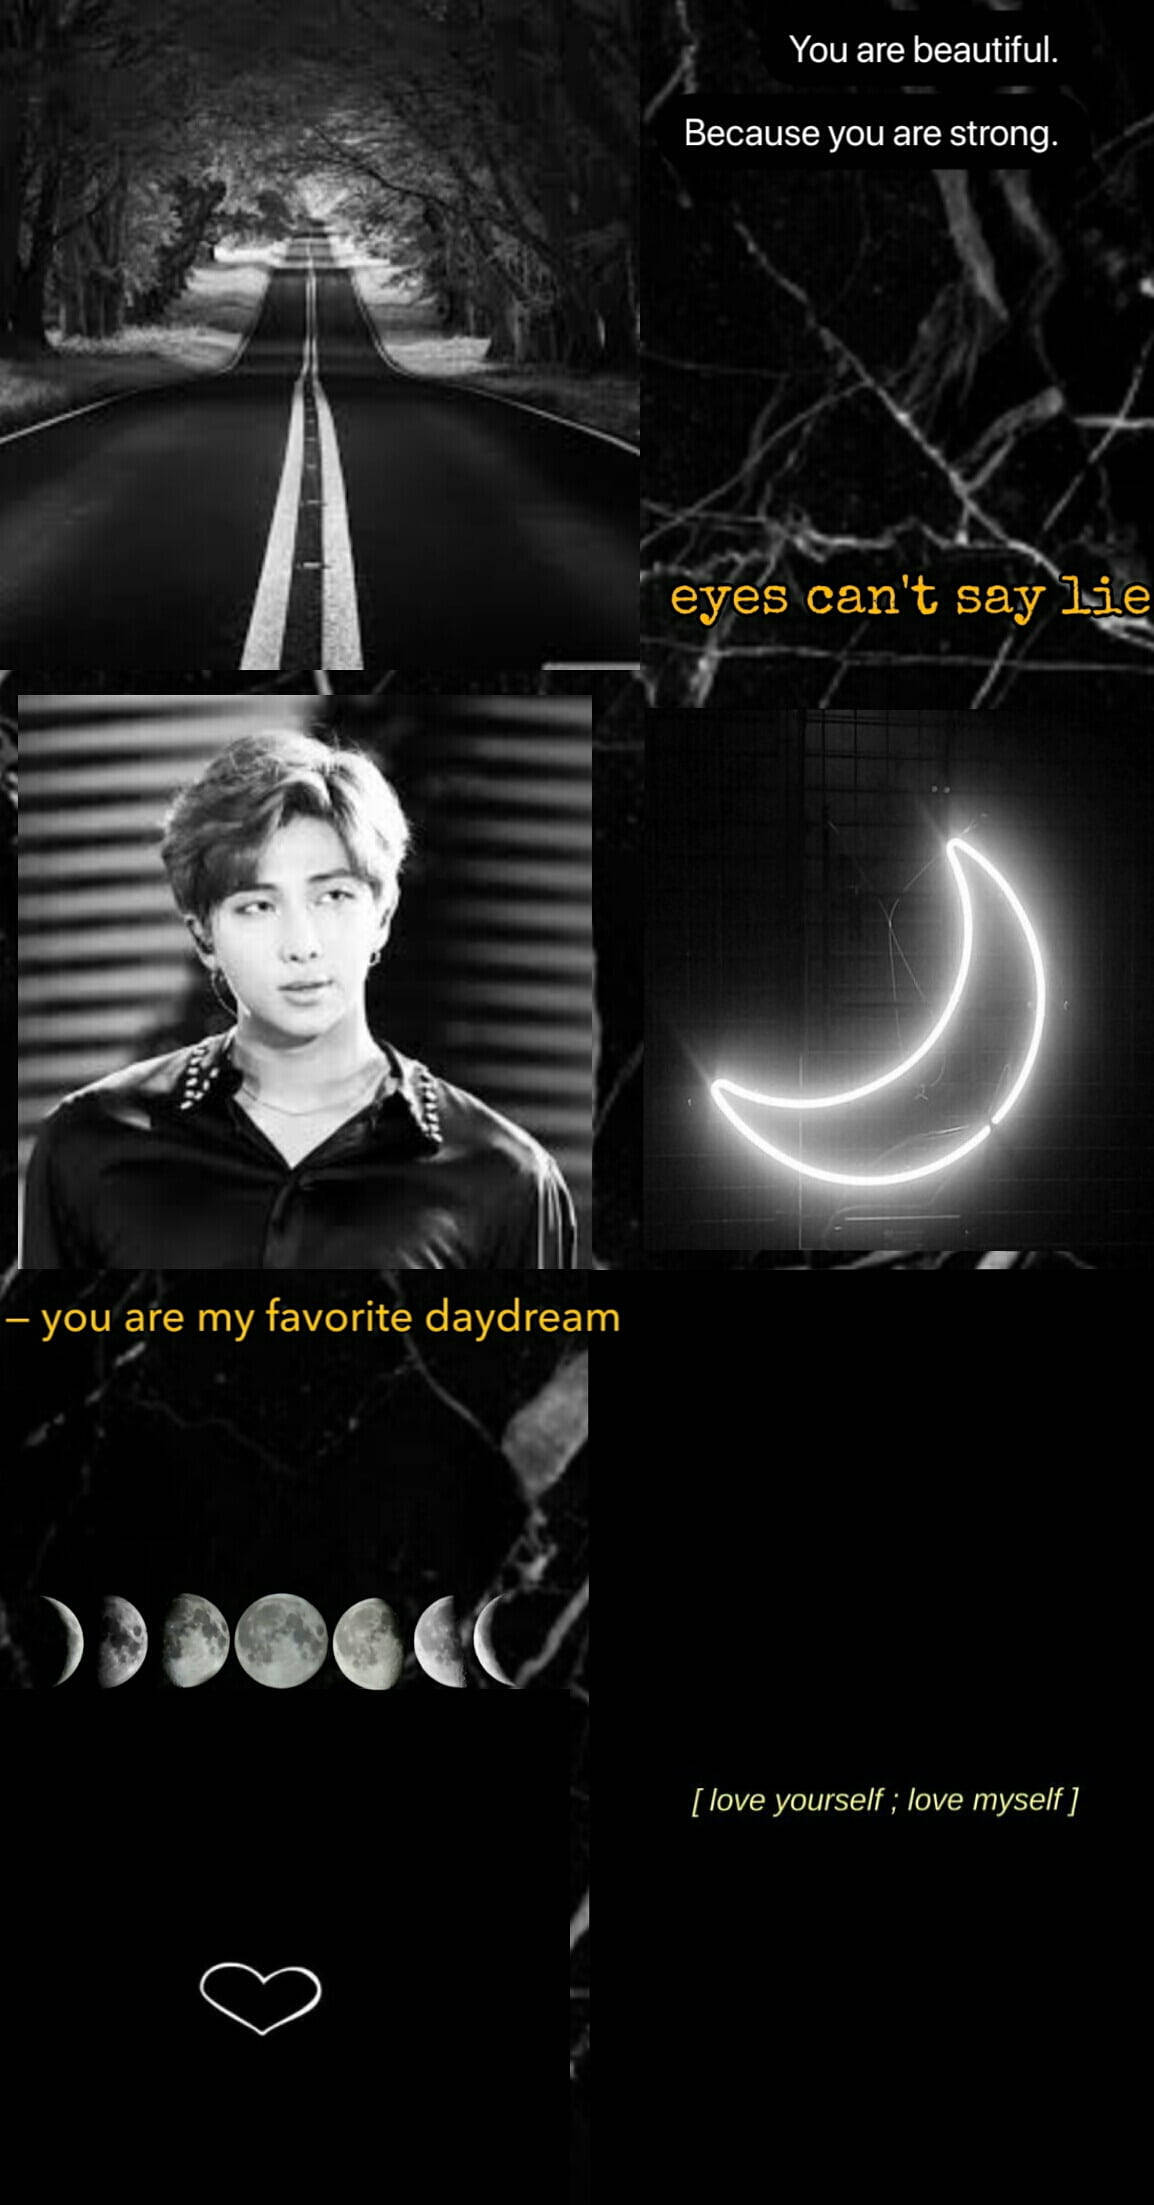 Black and white aesthetic wallpaper with quotes and images of bts, the moon, and a road - Black